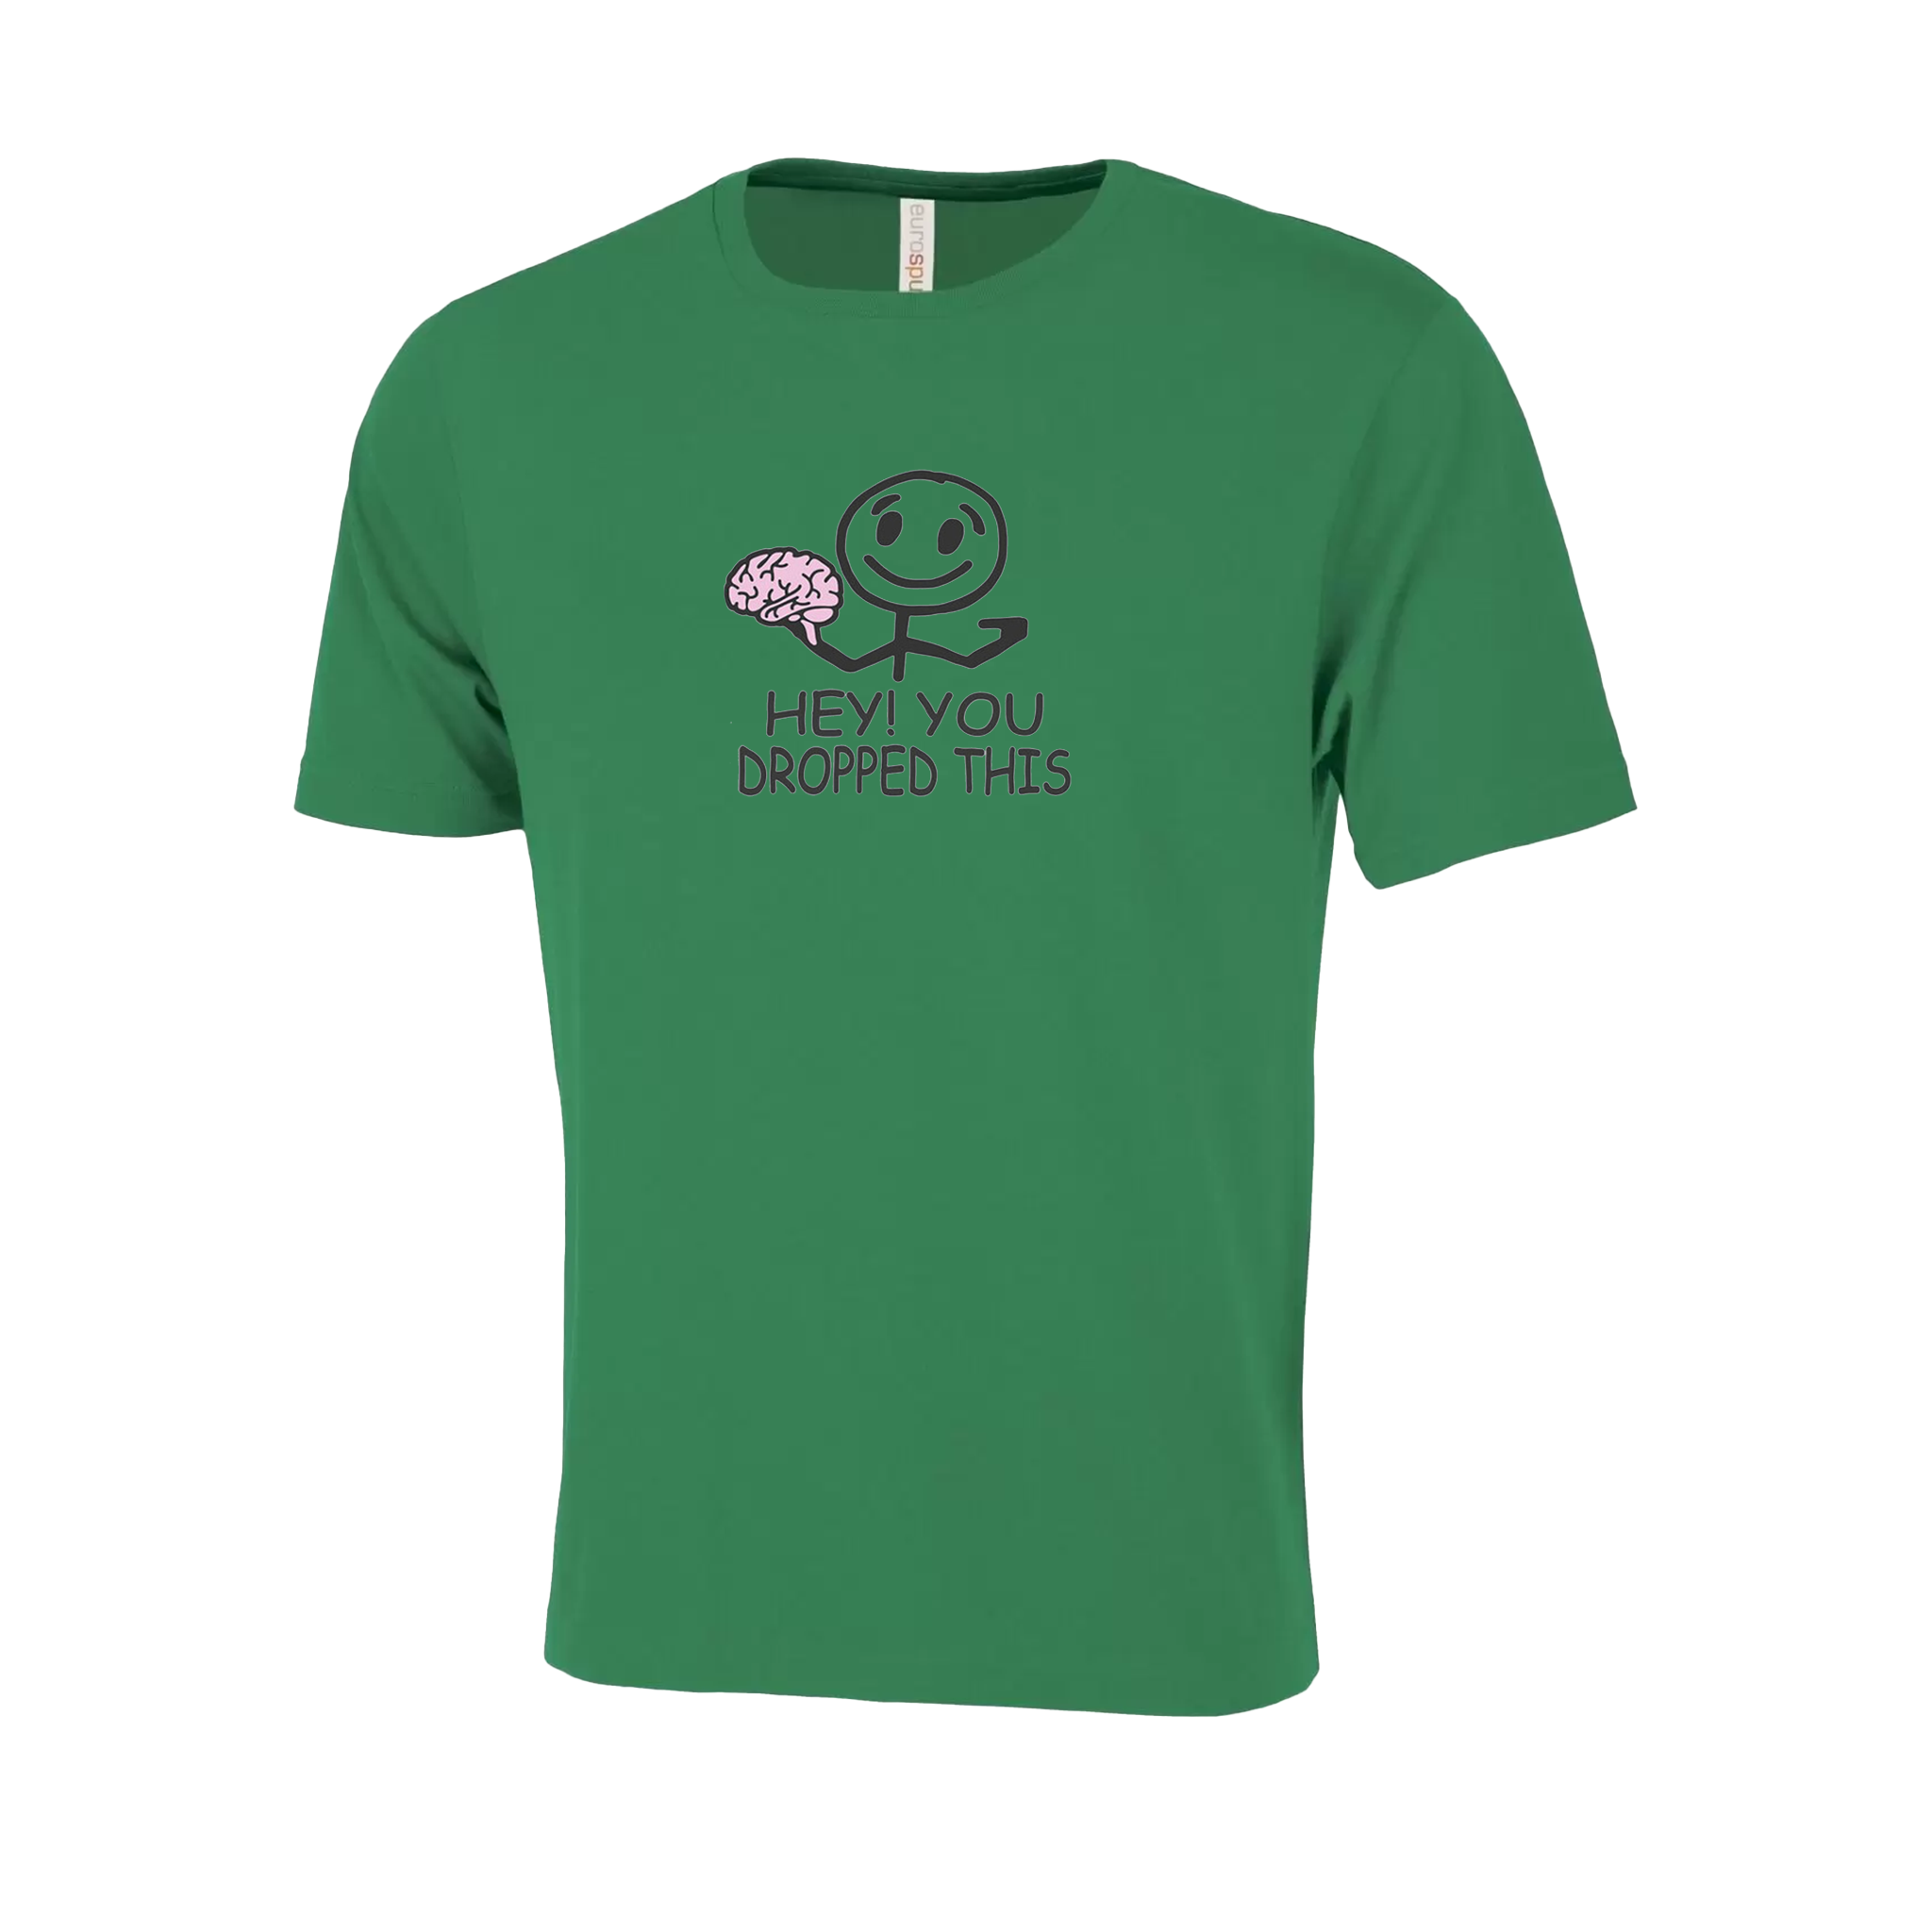 Dropped Your Brains Novelty T-Shirt - Adult Unisex Sizing XS-4XL - Green